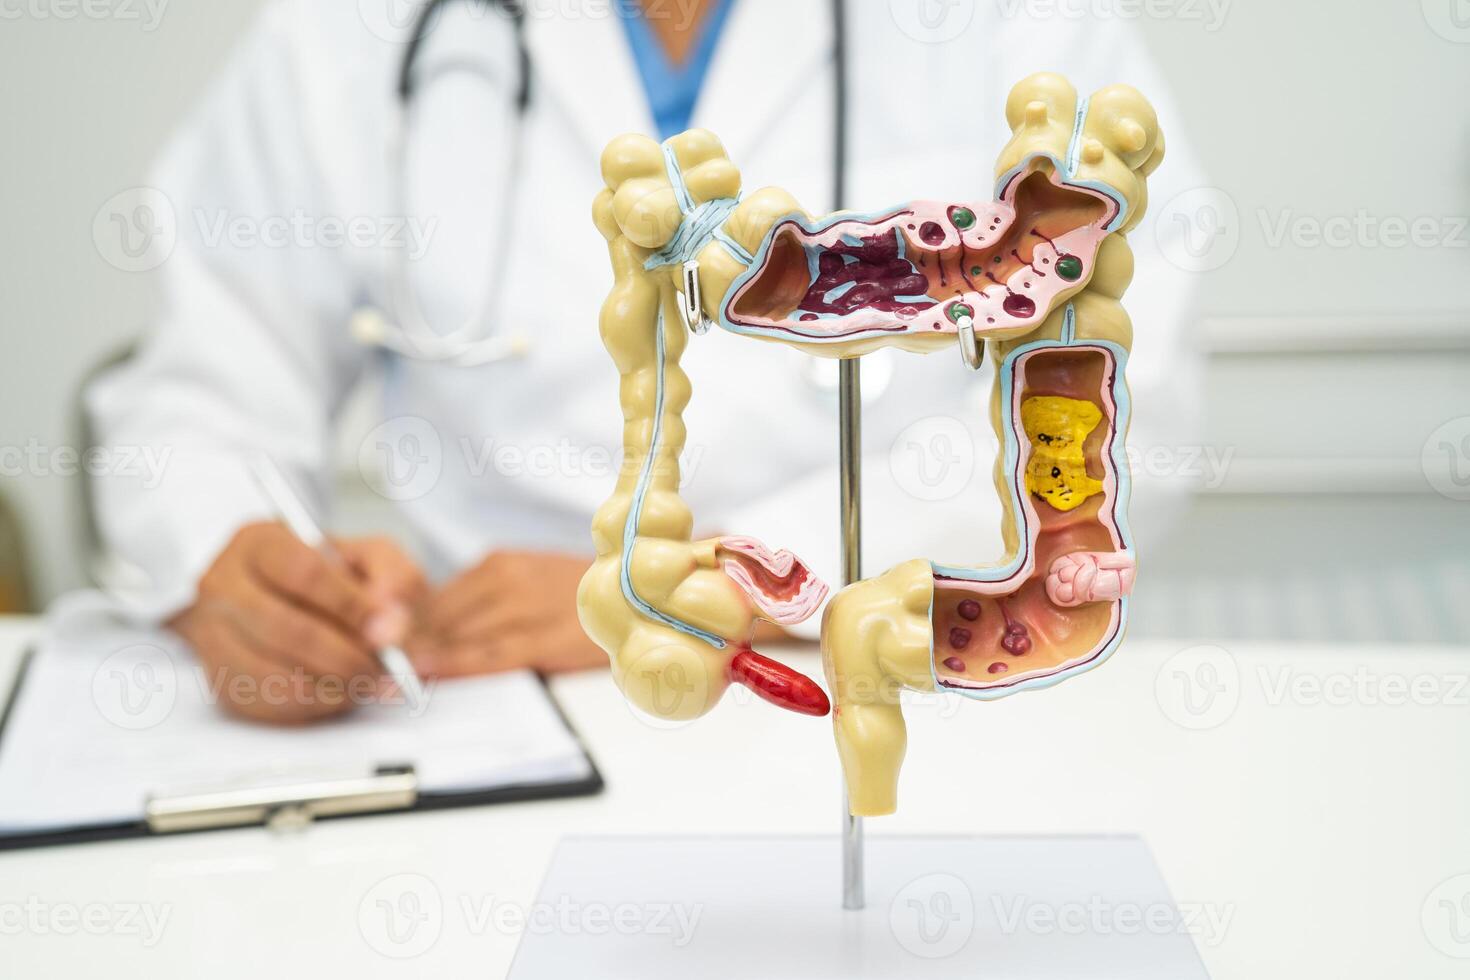 Intestine, appendix and digestive system, doctor holding anatomy model for study diagnosis and treatment in hospital. photo